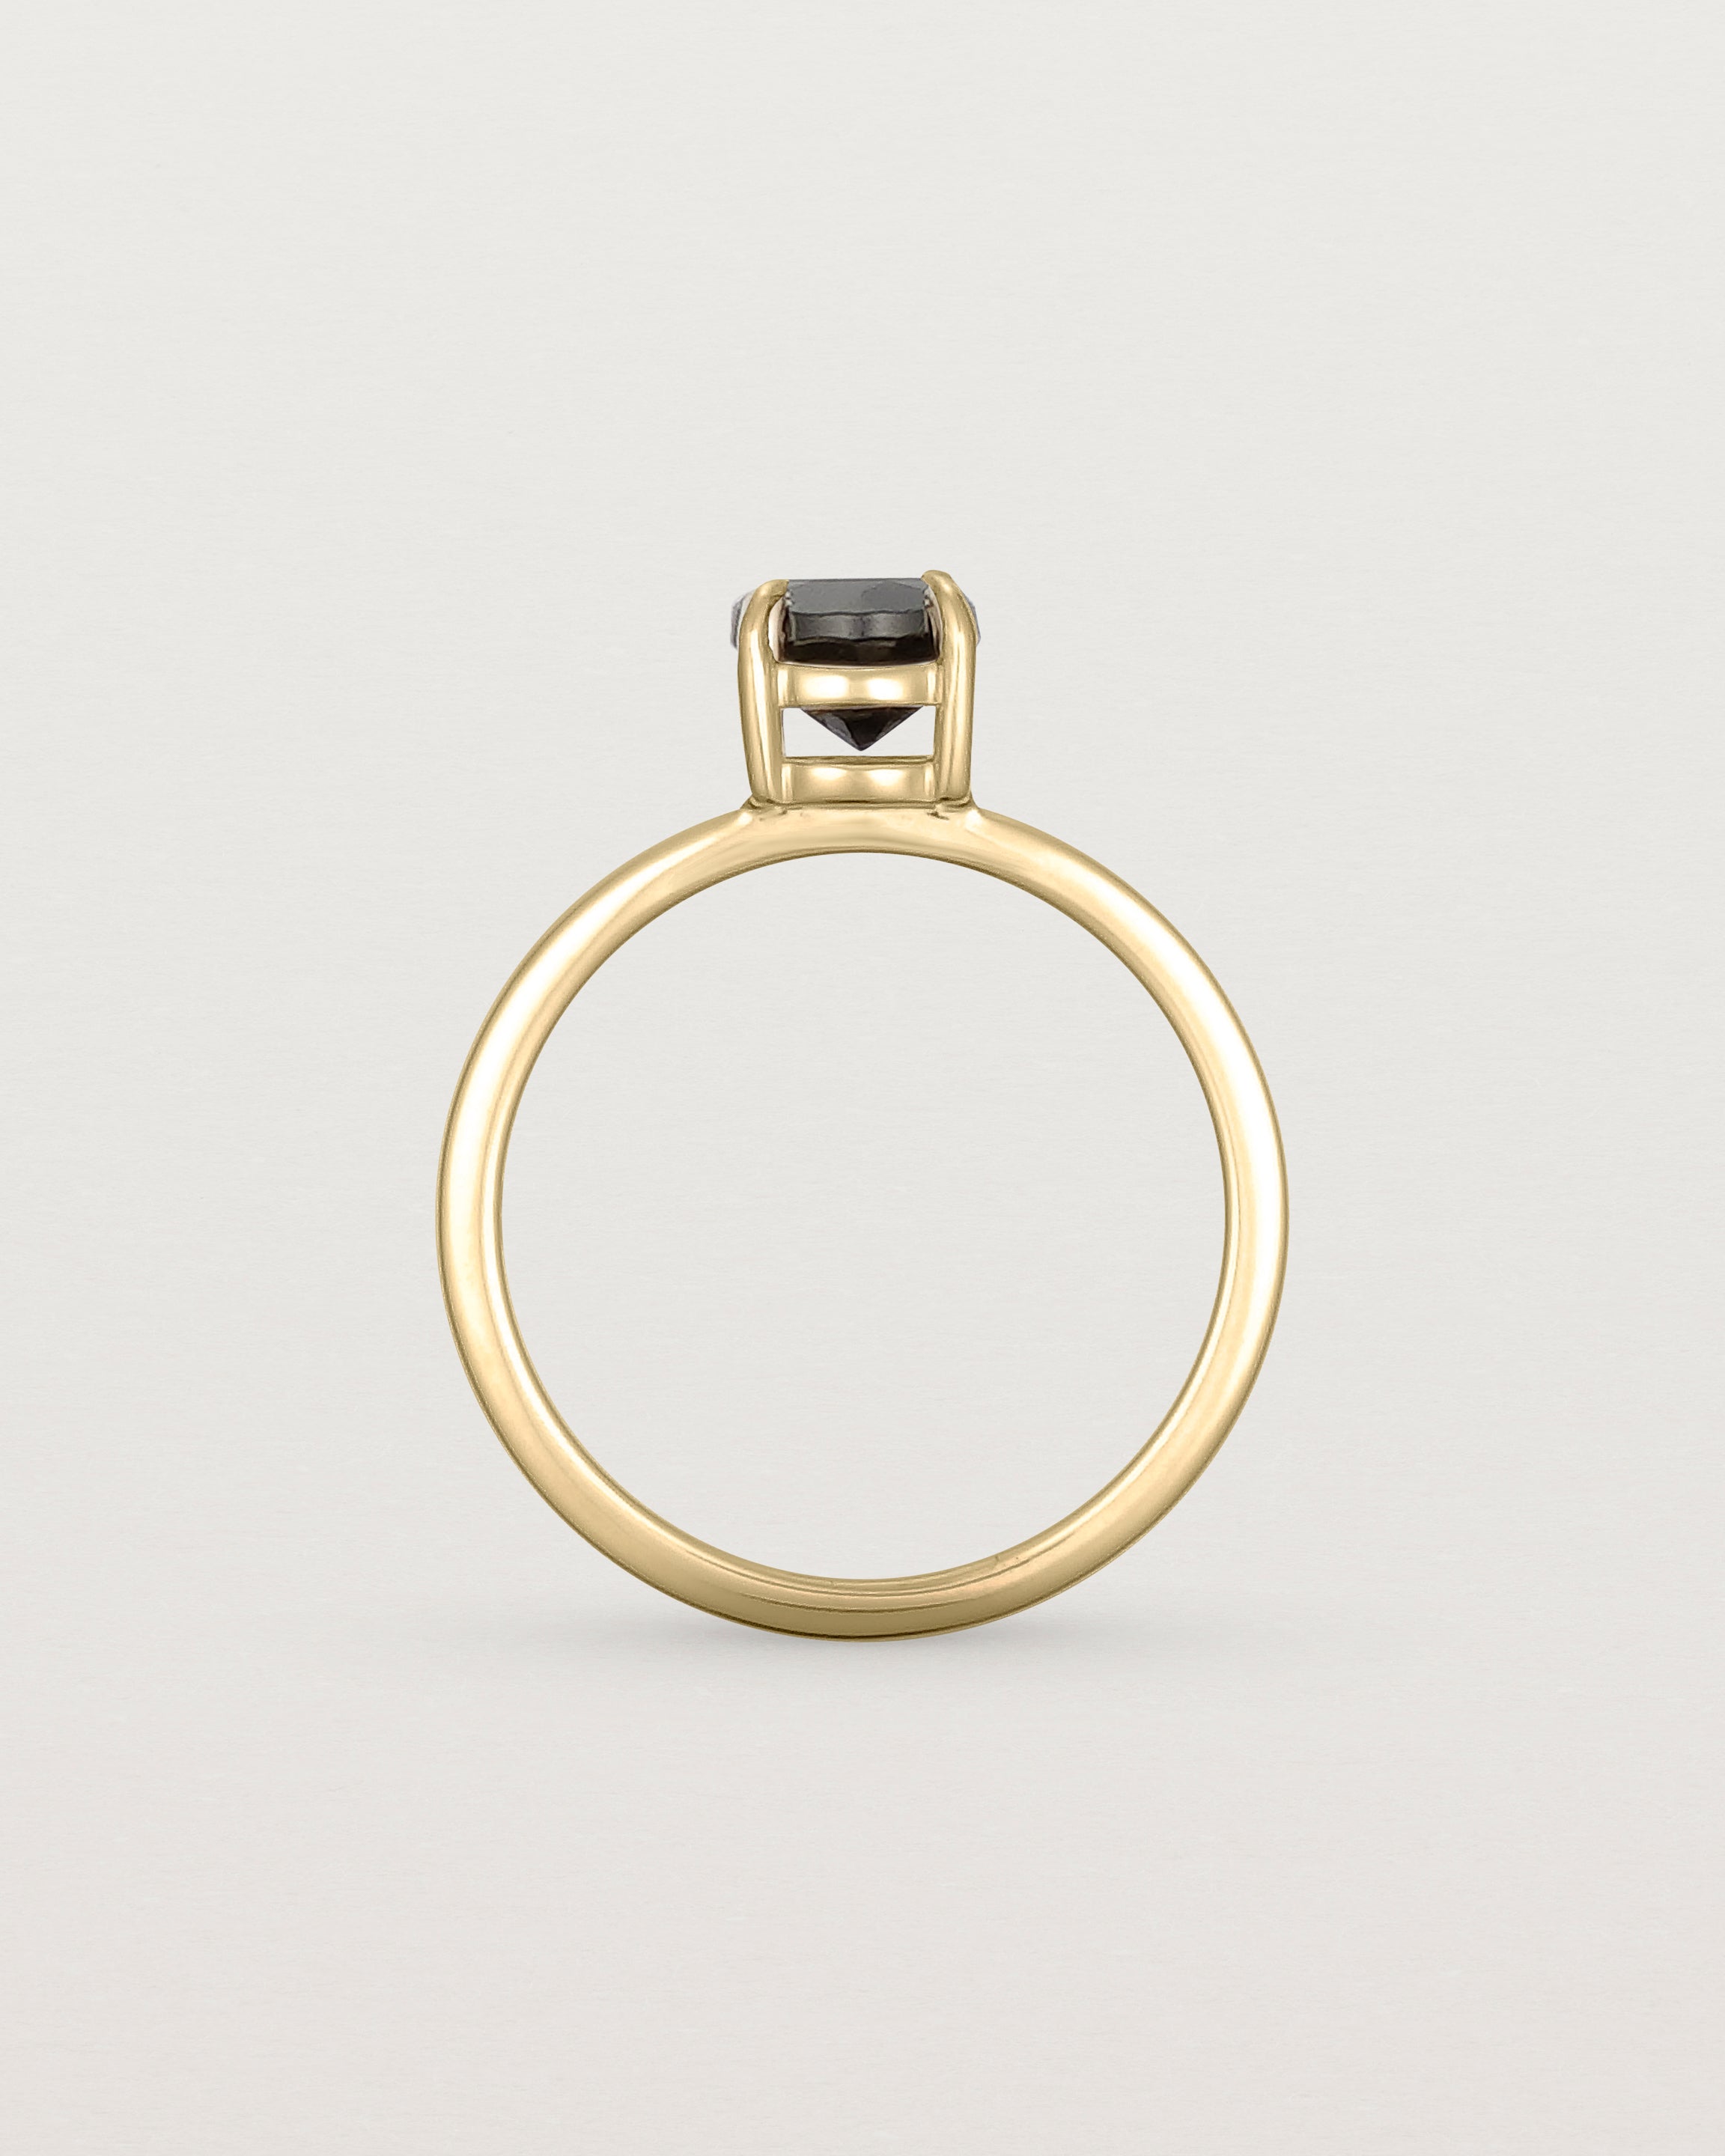 Standing view of the Petite Una Round Solitaire | Black Spinel | Yellow Gold.